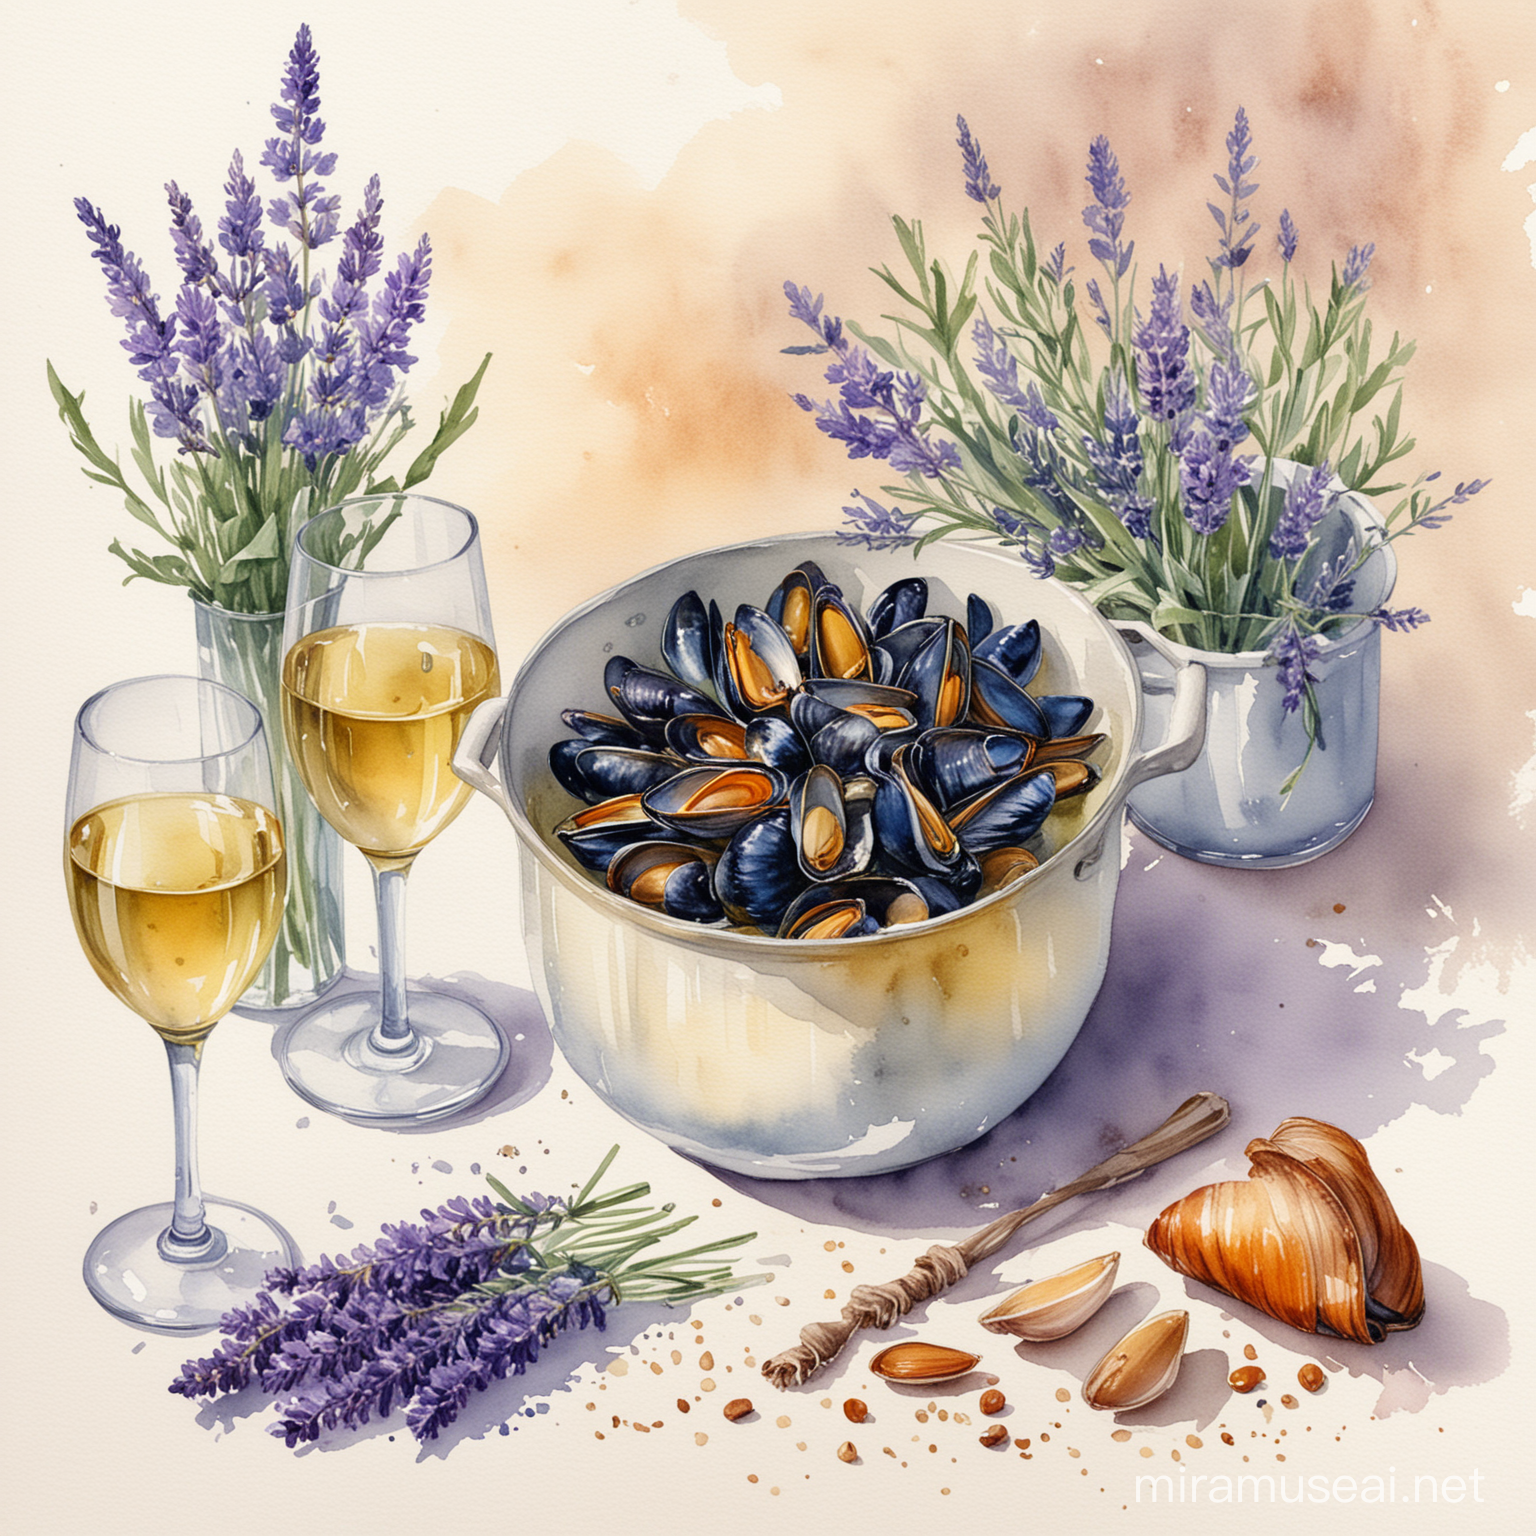 image of a glass of white wine, cloves of garlic, a bouquet of lavender and a saucepan with mussels drawn in watercolor